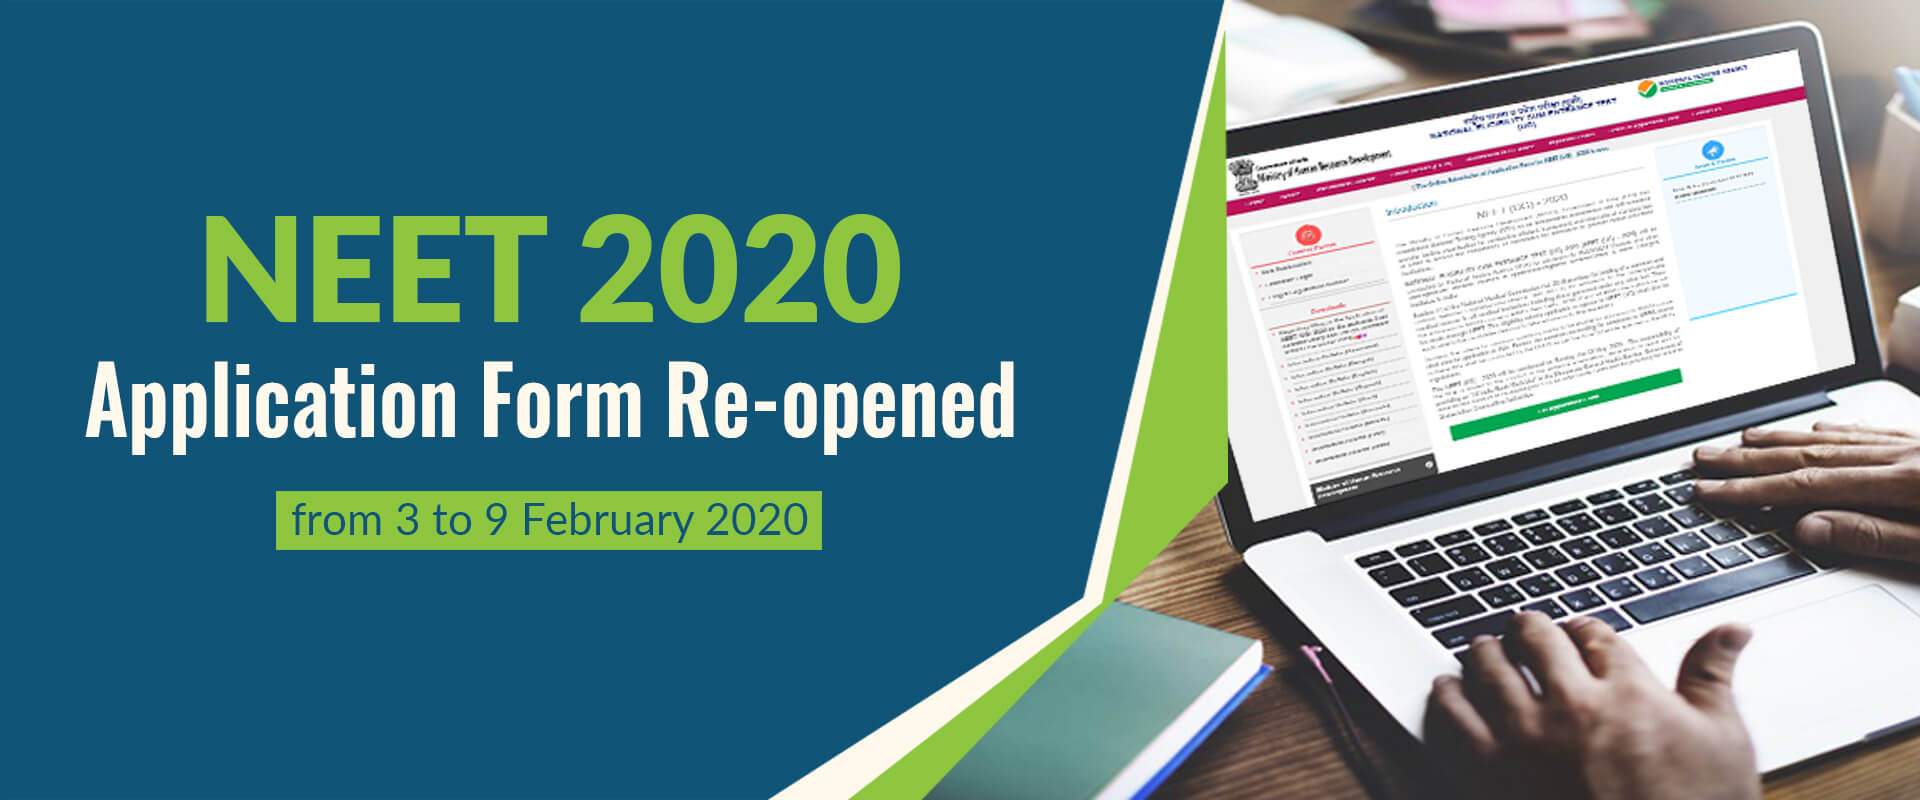 NEET 2020 Application Forms Reopened